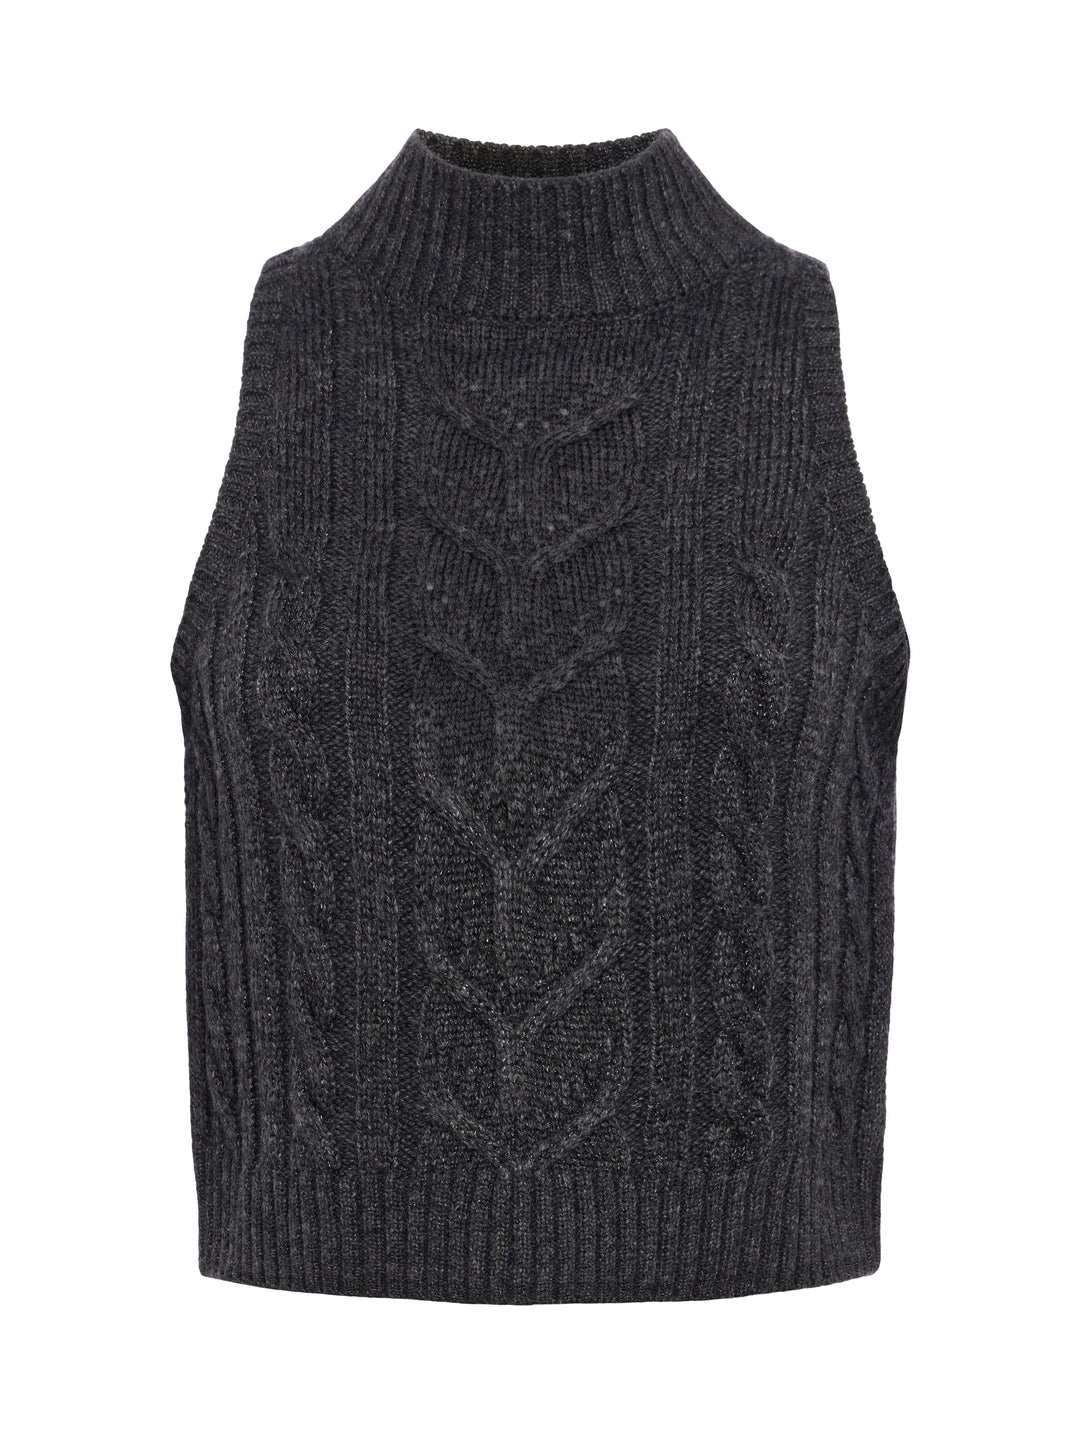 Bellini Cable Turtleneck Tank in Charcoal